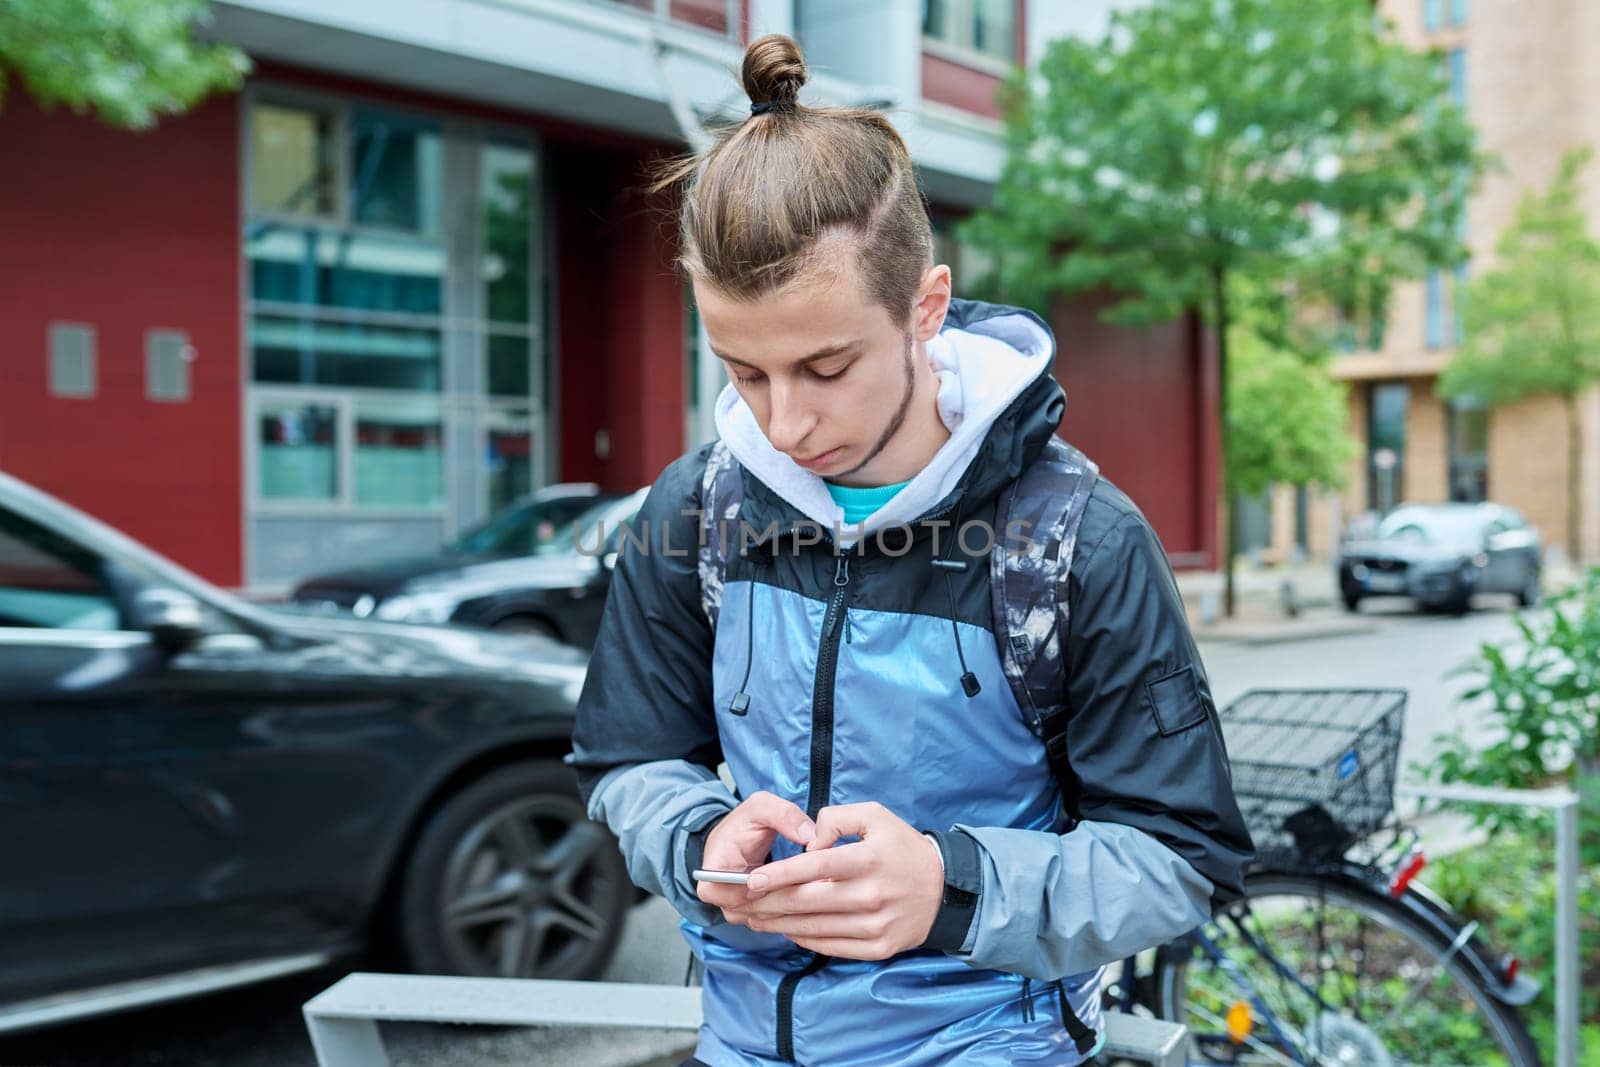 Fashionable young male with backpack using smartphone outdoors in city by VH-studio